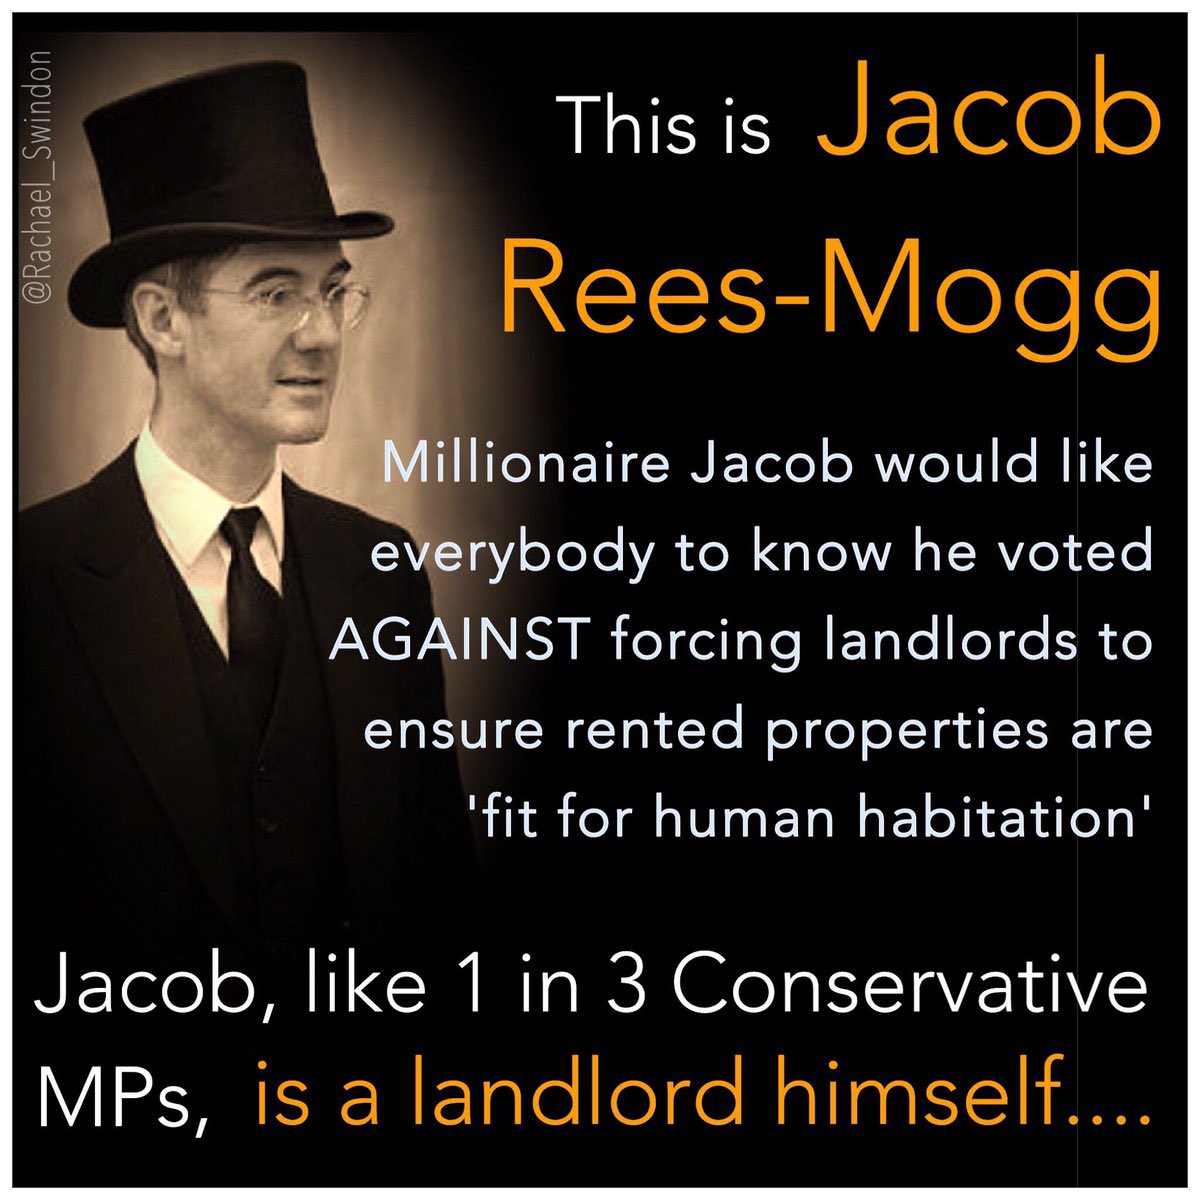 @Jacob_Rees_Mogg May you rot in hell for what you have done to the poor people of this country just to satisfy your selfish greed!